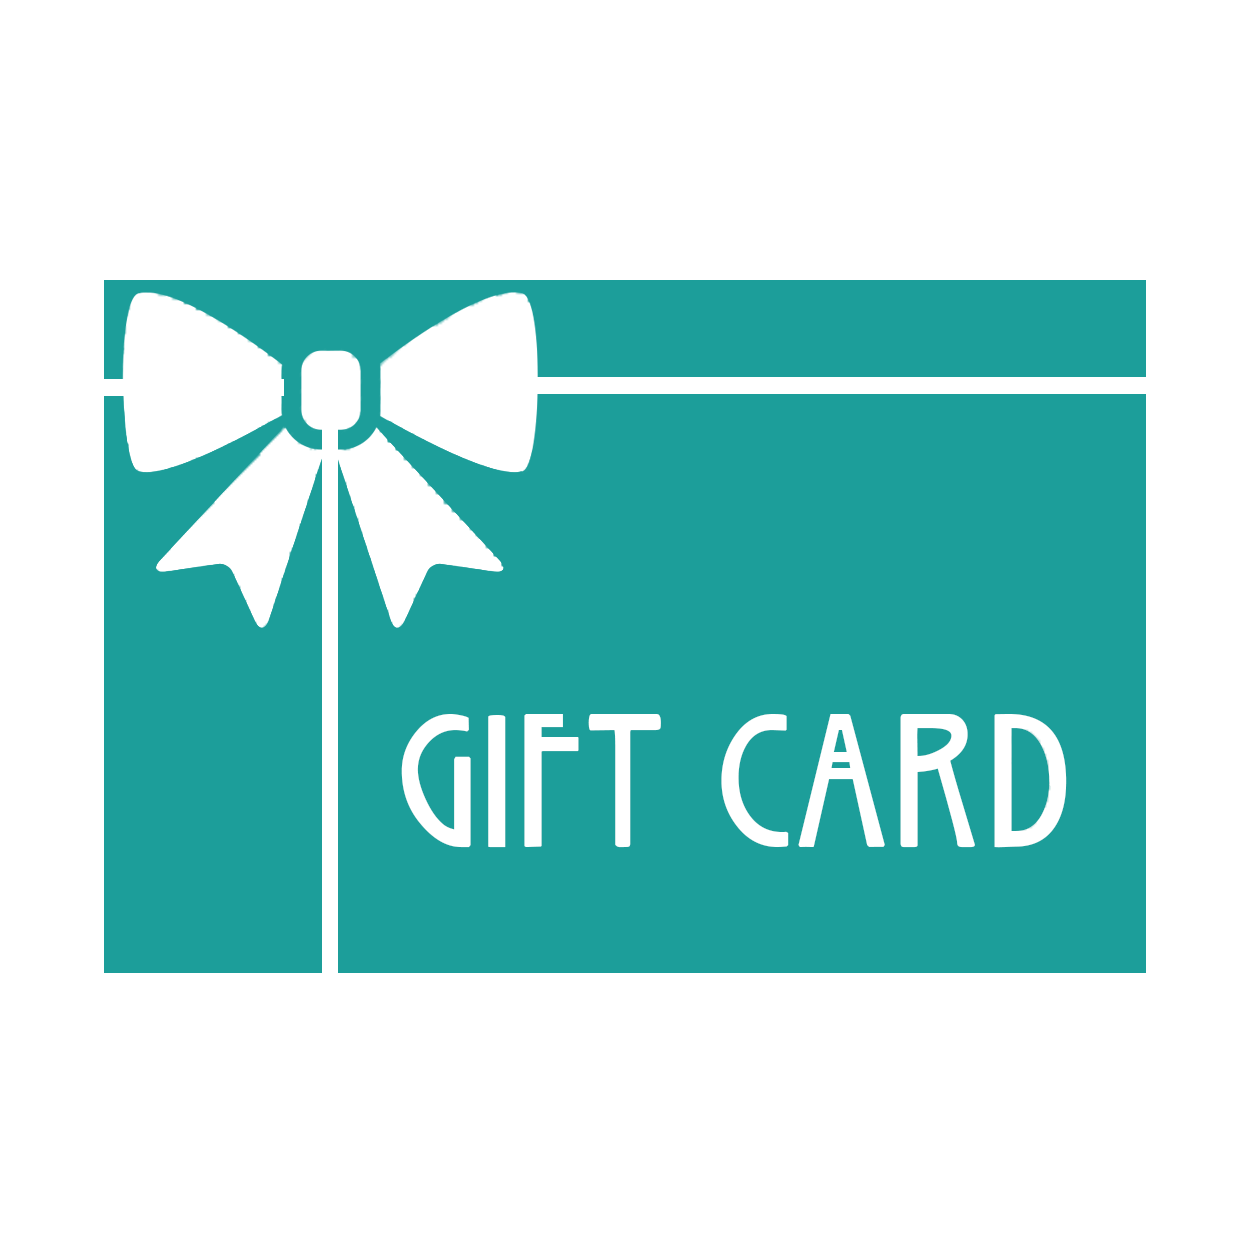 Gift Card - Four Seasons Gallery